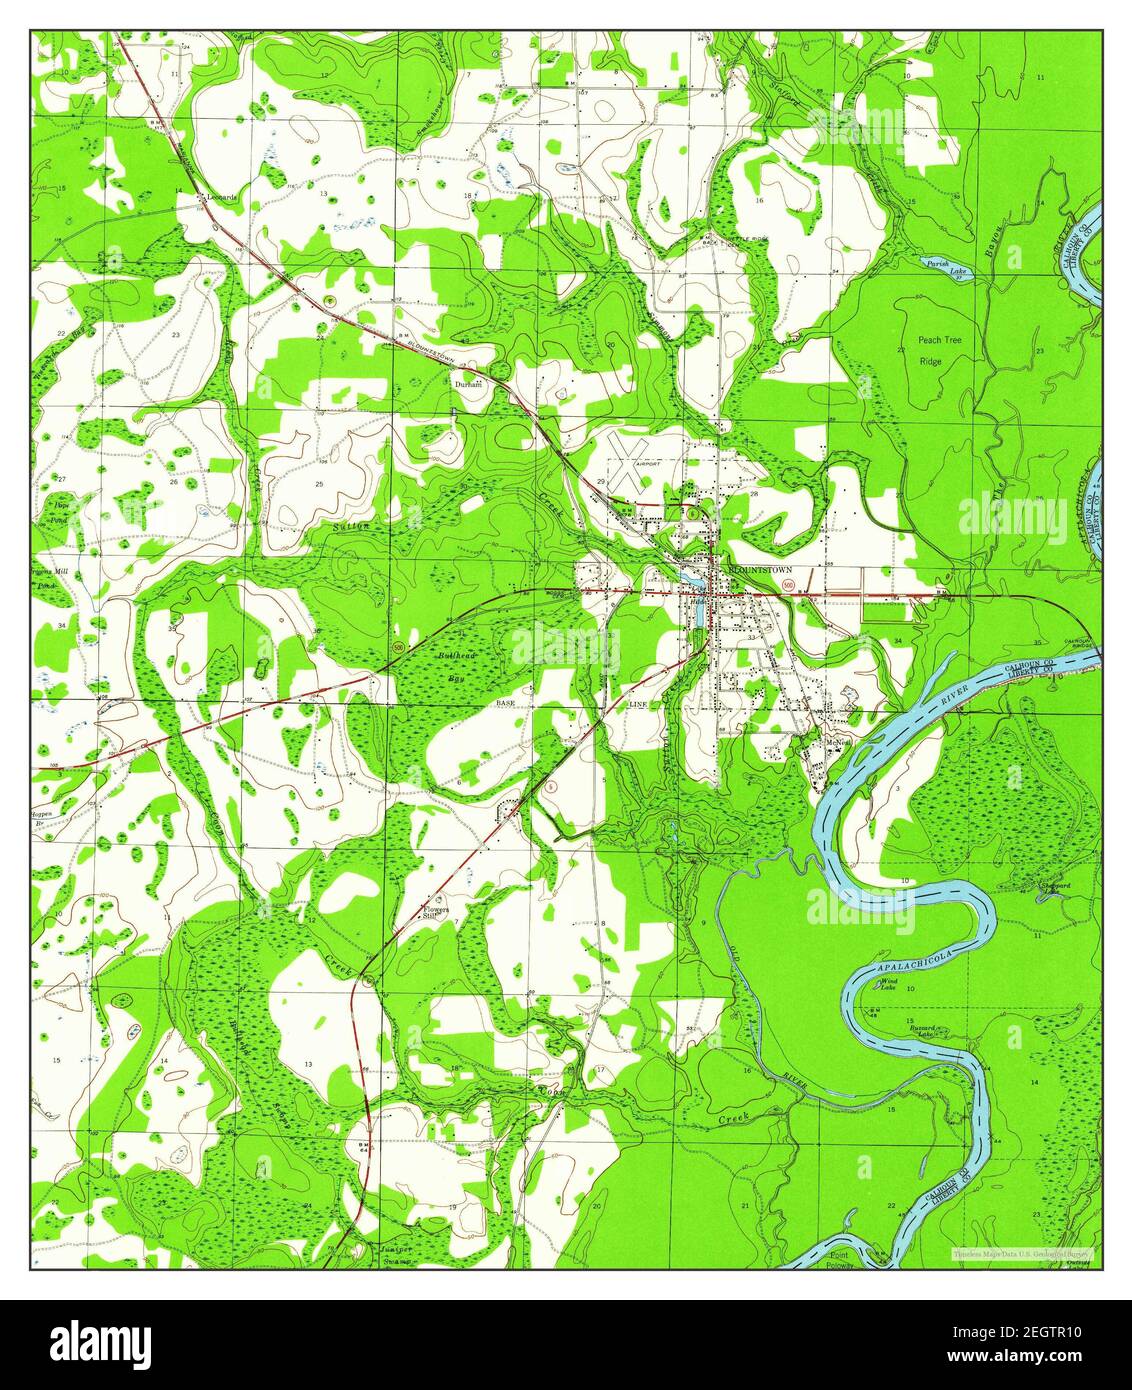 Blountstown, Florida, map 1945, 1:24000, United States of America by Timeless Maps, data U.S. Geological Survey Stock Photo